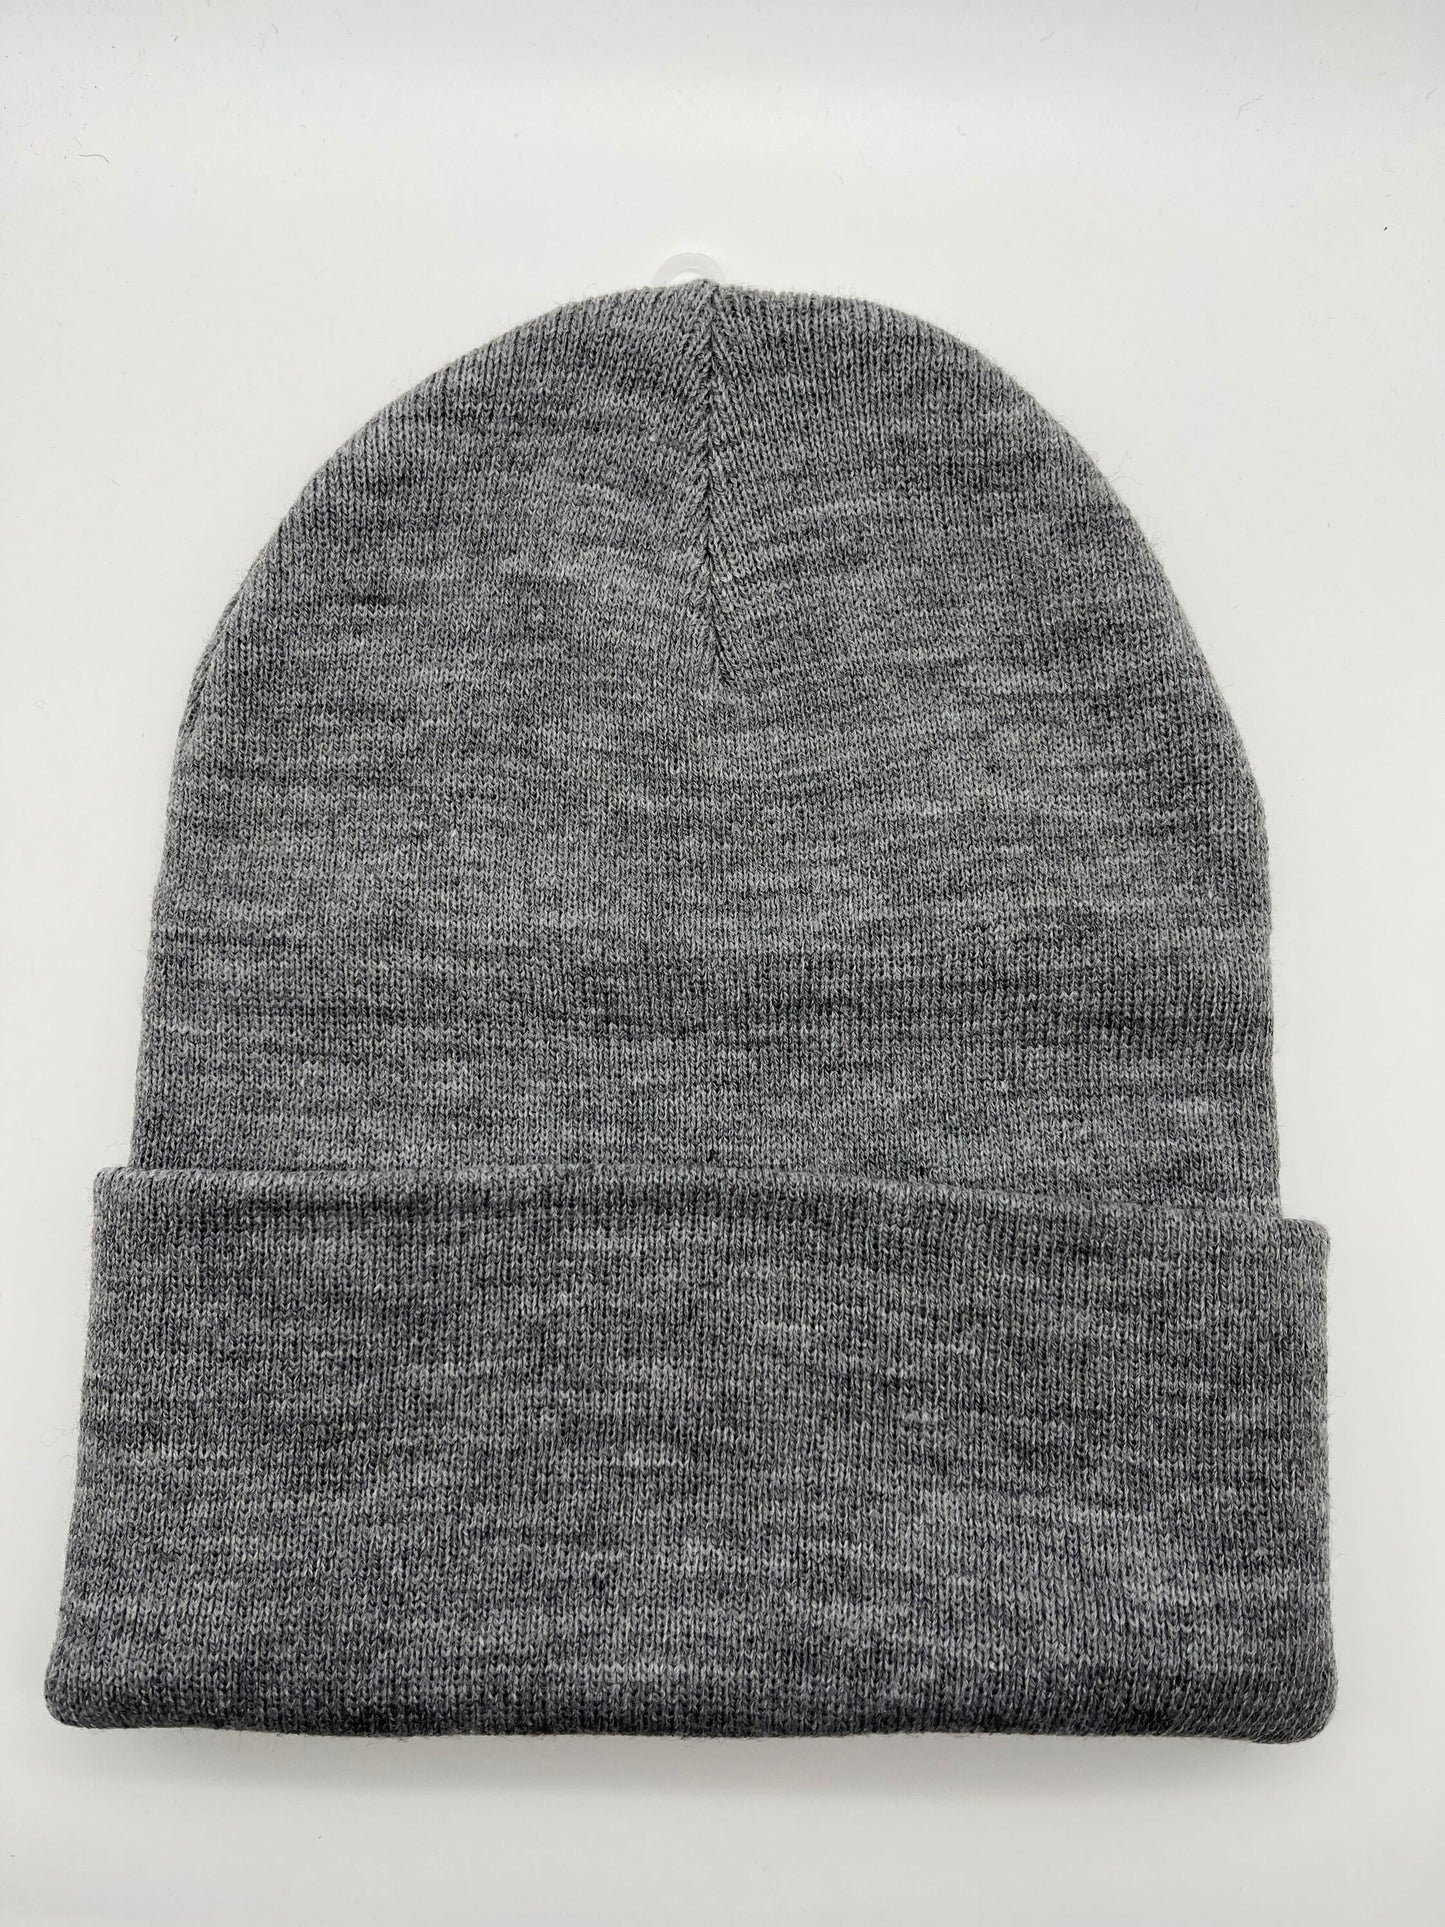 Any State Trapping Dark Gray or Light Gray Winter Knit Hat | Beanie |